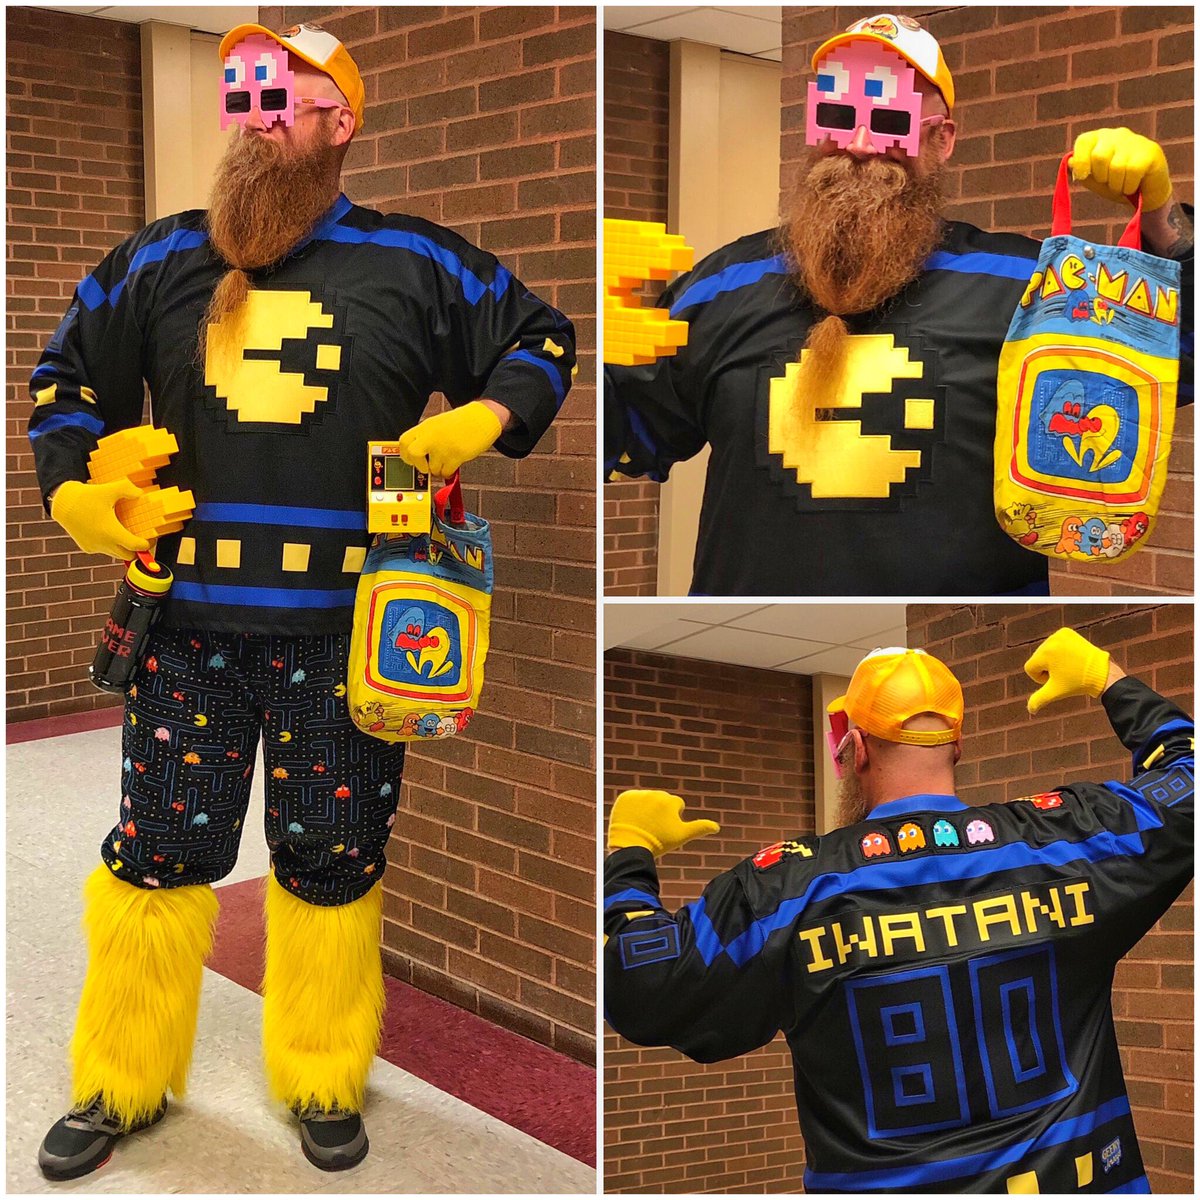 Happy #GeekyJerseyMonday… and a DOUBLE Geeky sorta day at that!

The ‘80s hit my students today in a TOTALLY TUBULAR way…

“Waka waka waka waka. Waka waka waka waka!” - Pac-Man, 1980

(1/4)

@GeekyJerseys #HartnellHistory #ALLN #RelentlessNorth #WhereYouBelong